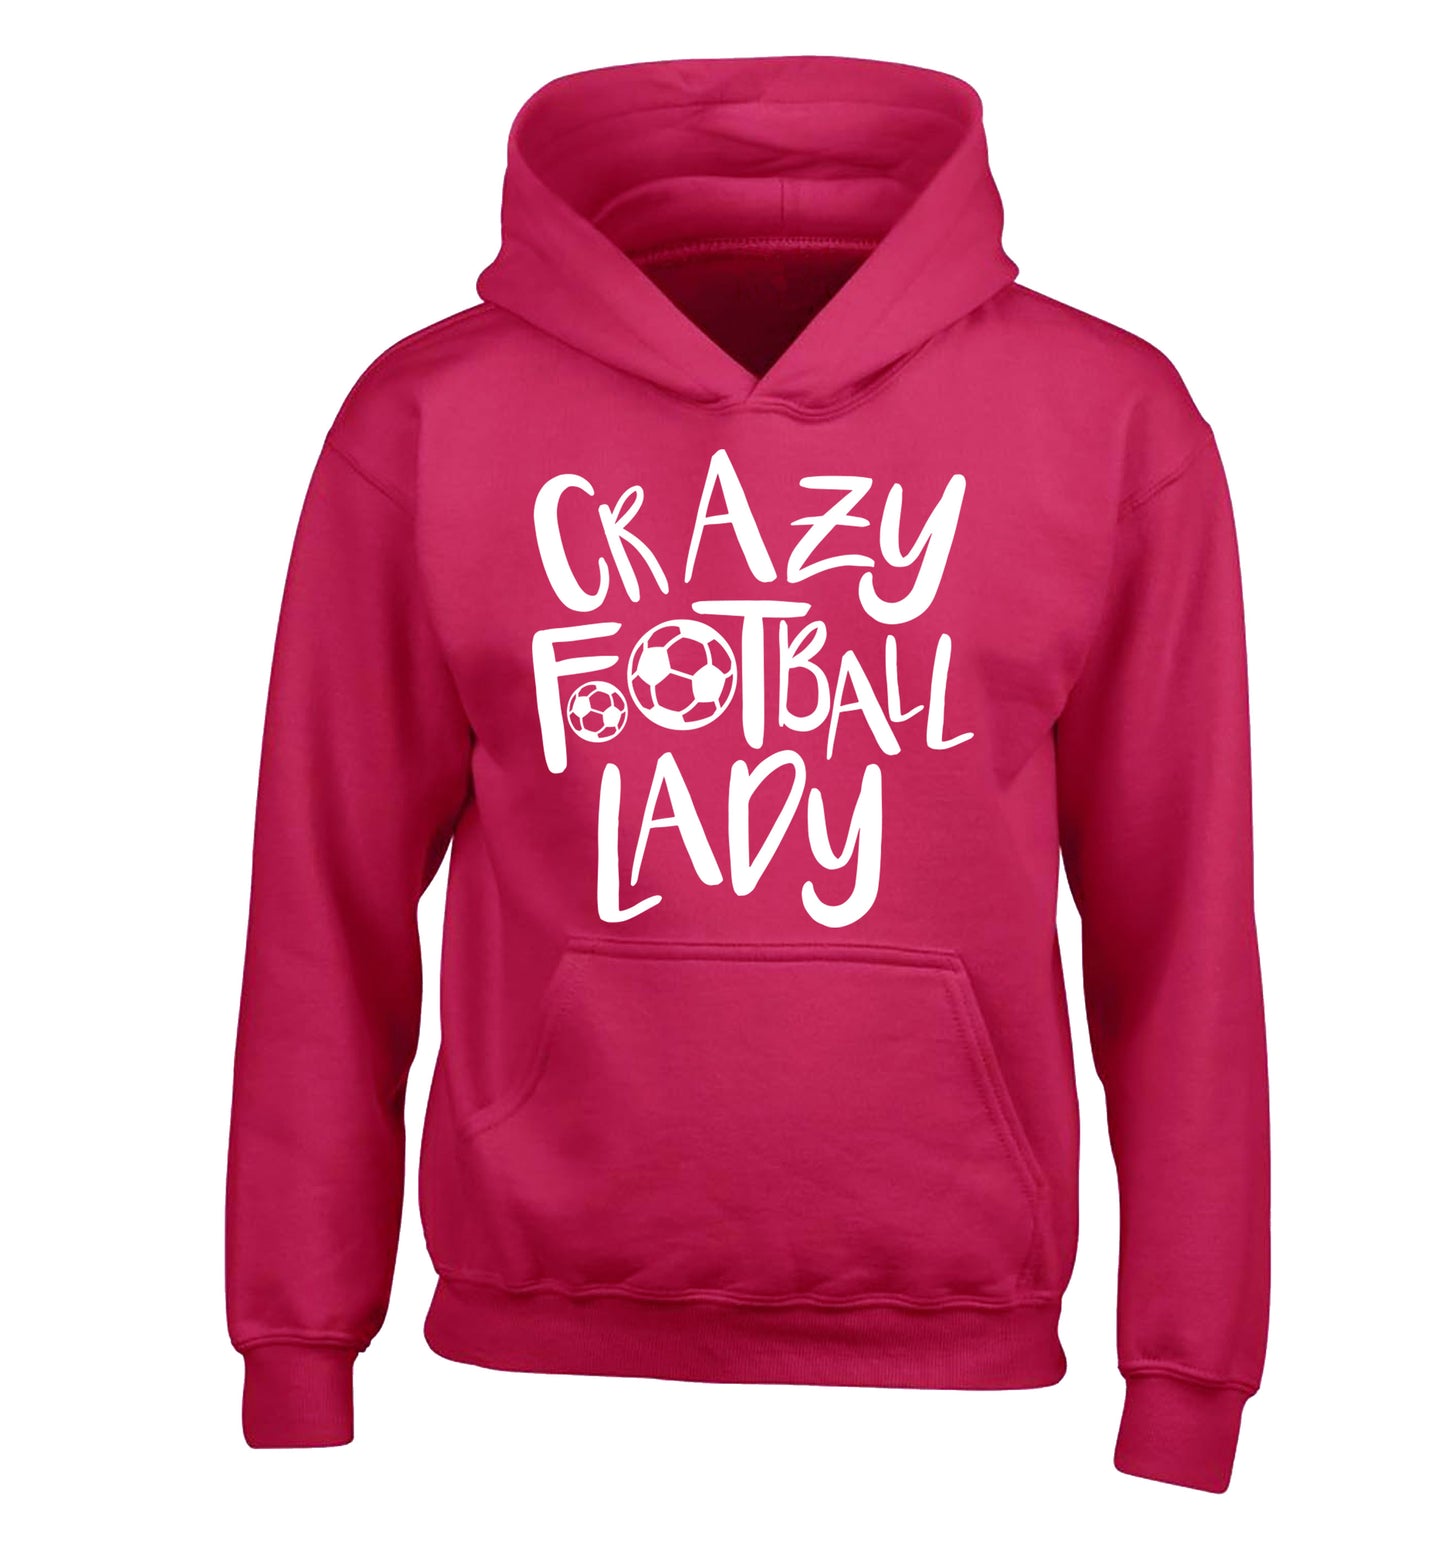 Crazy football lady children's pink hoodie 12-14 Years